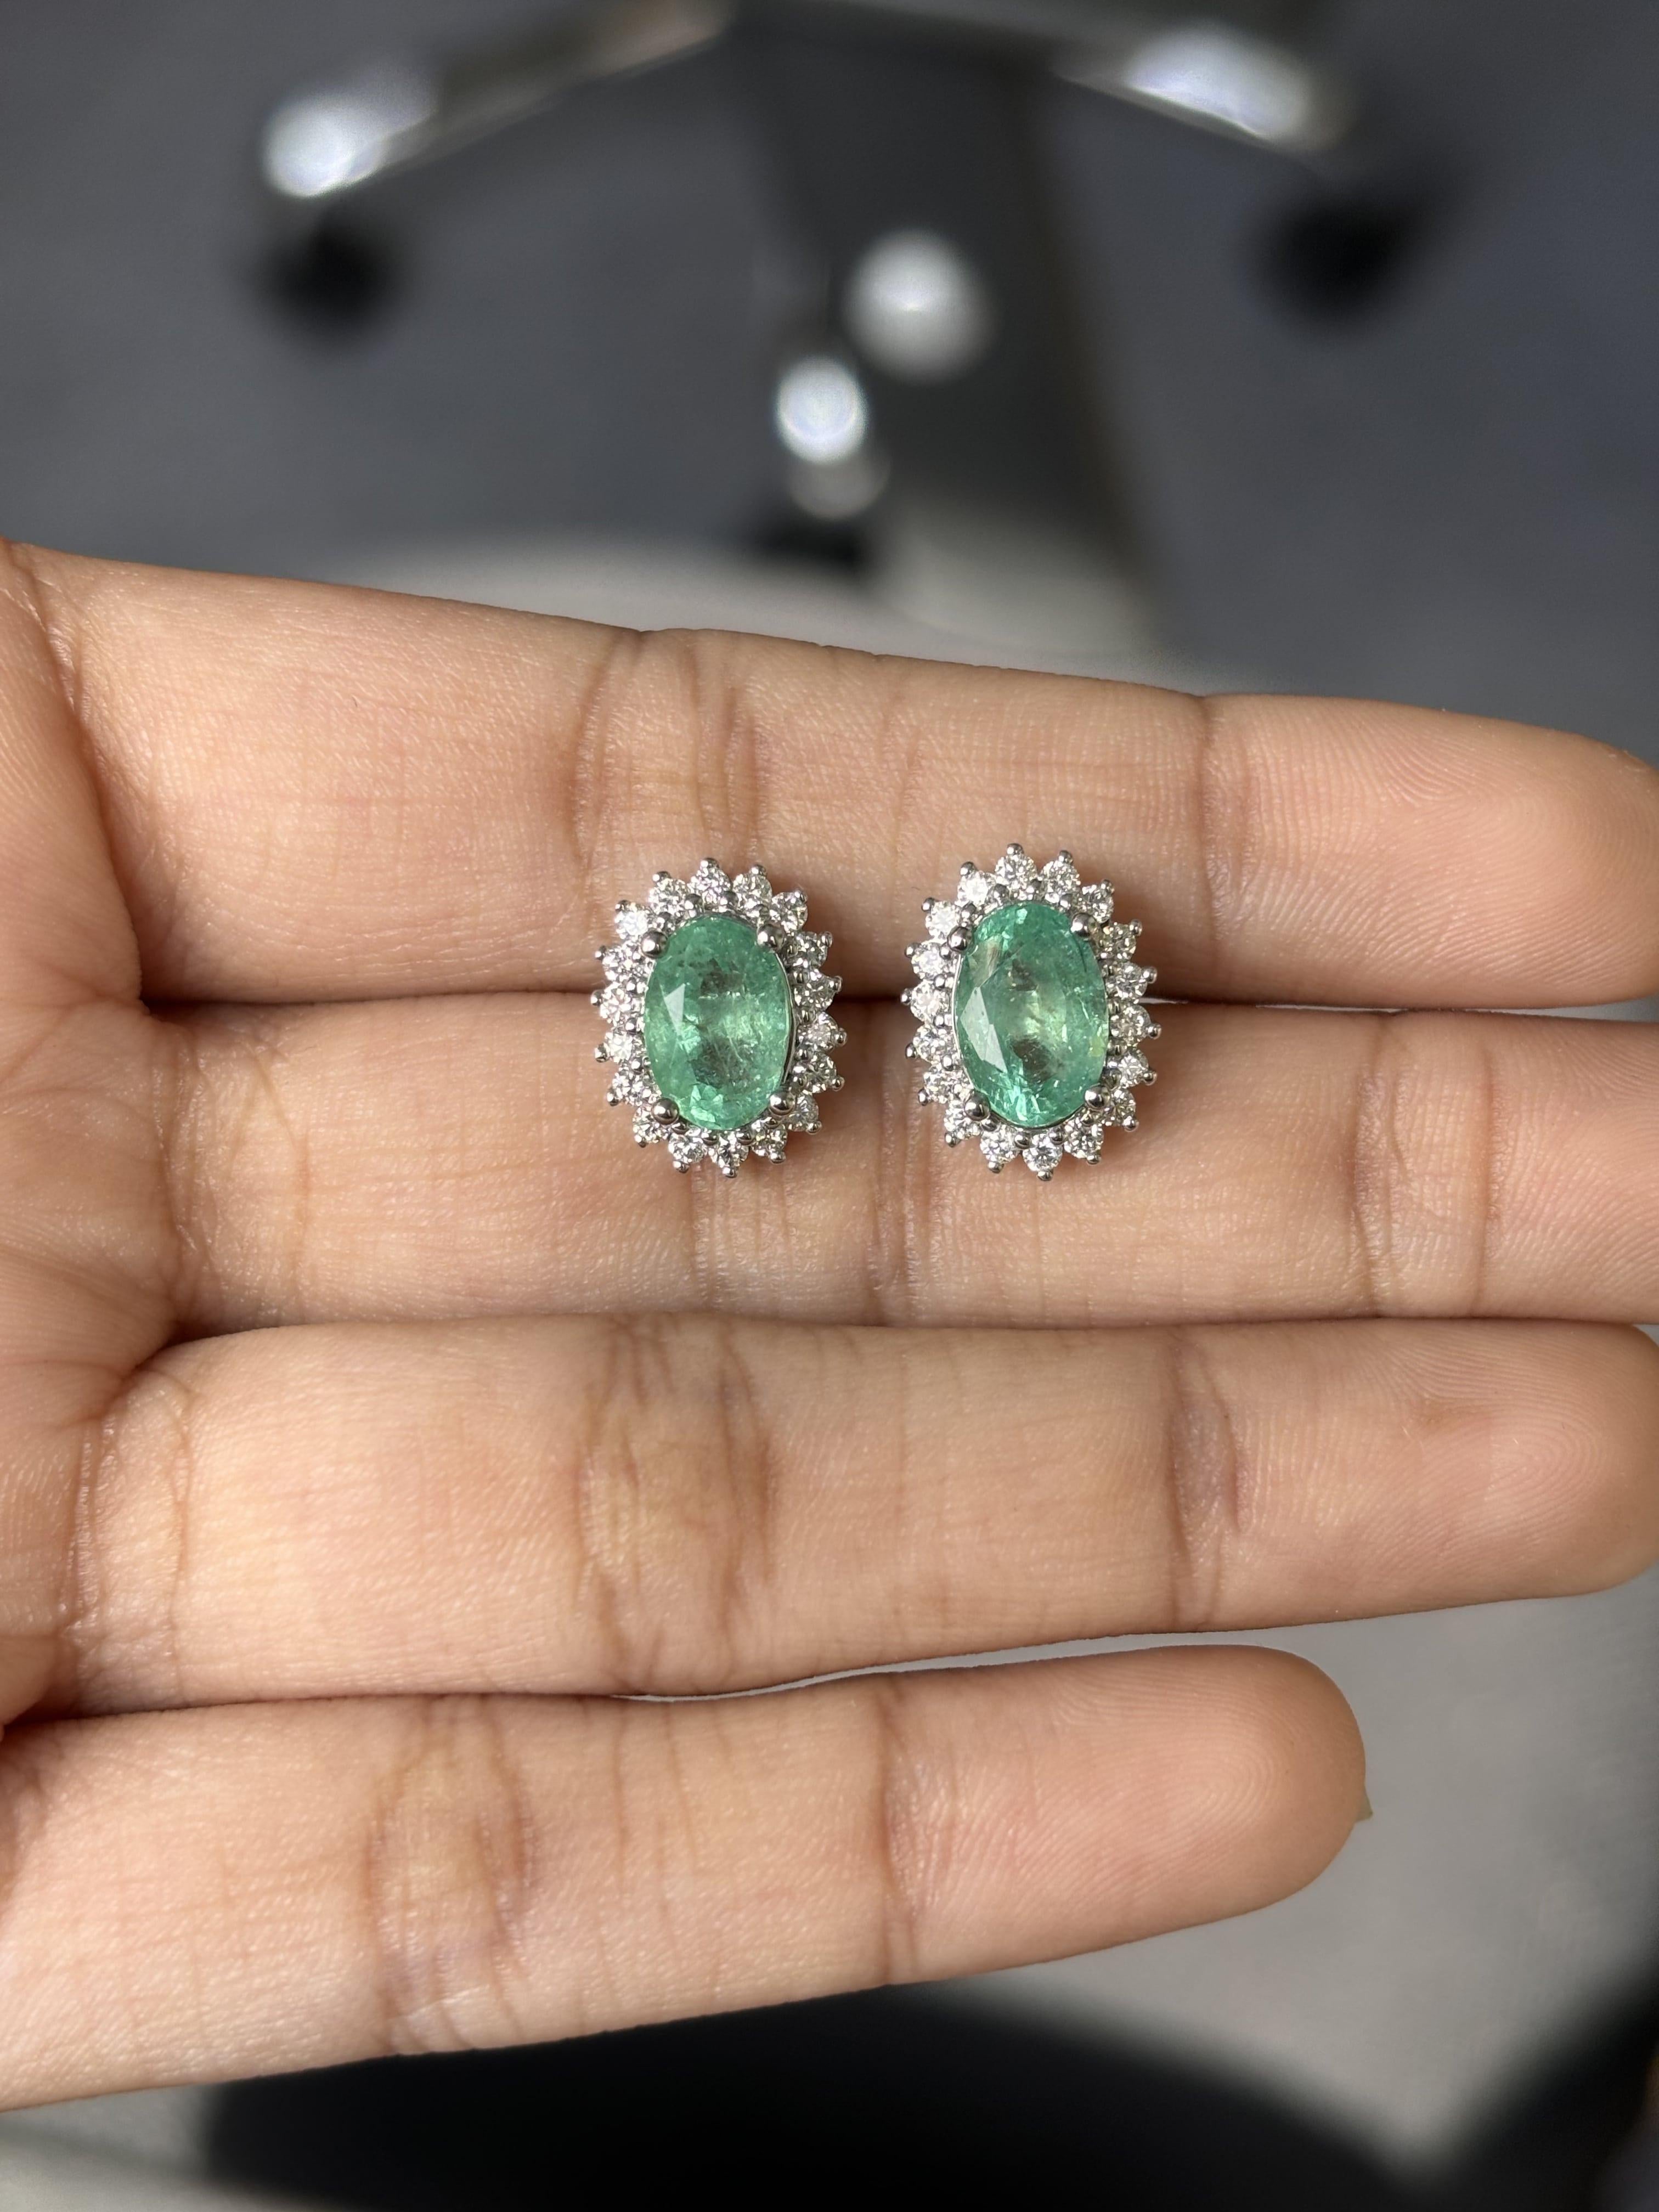  2.96 Carat Emerald Stud Earrings with Natural Diamonds in 18K White Gold  For Sale 4